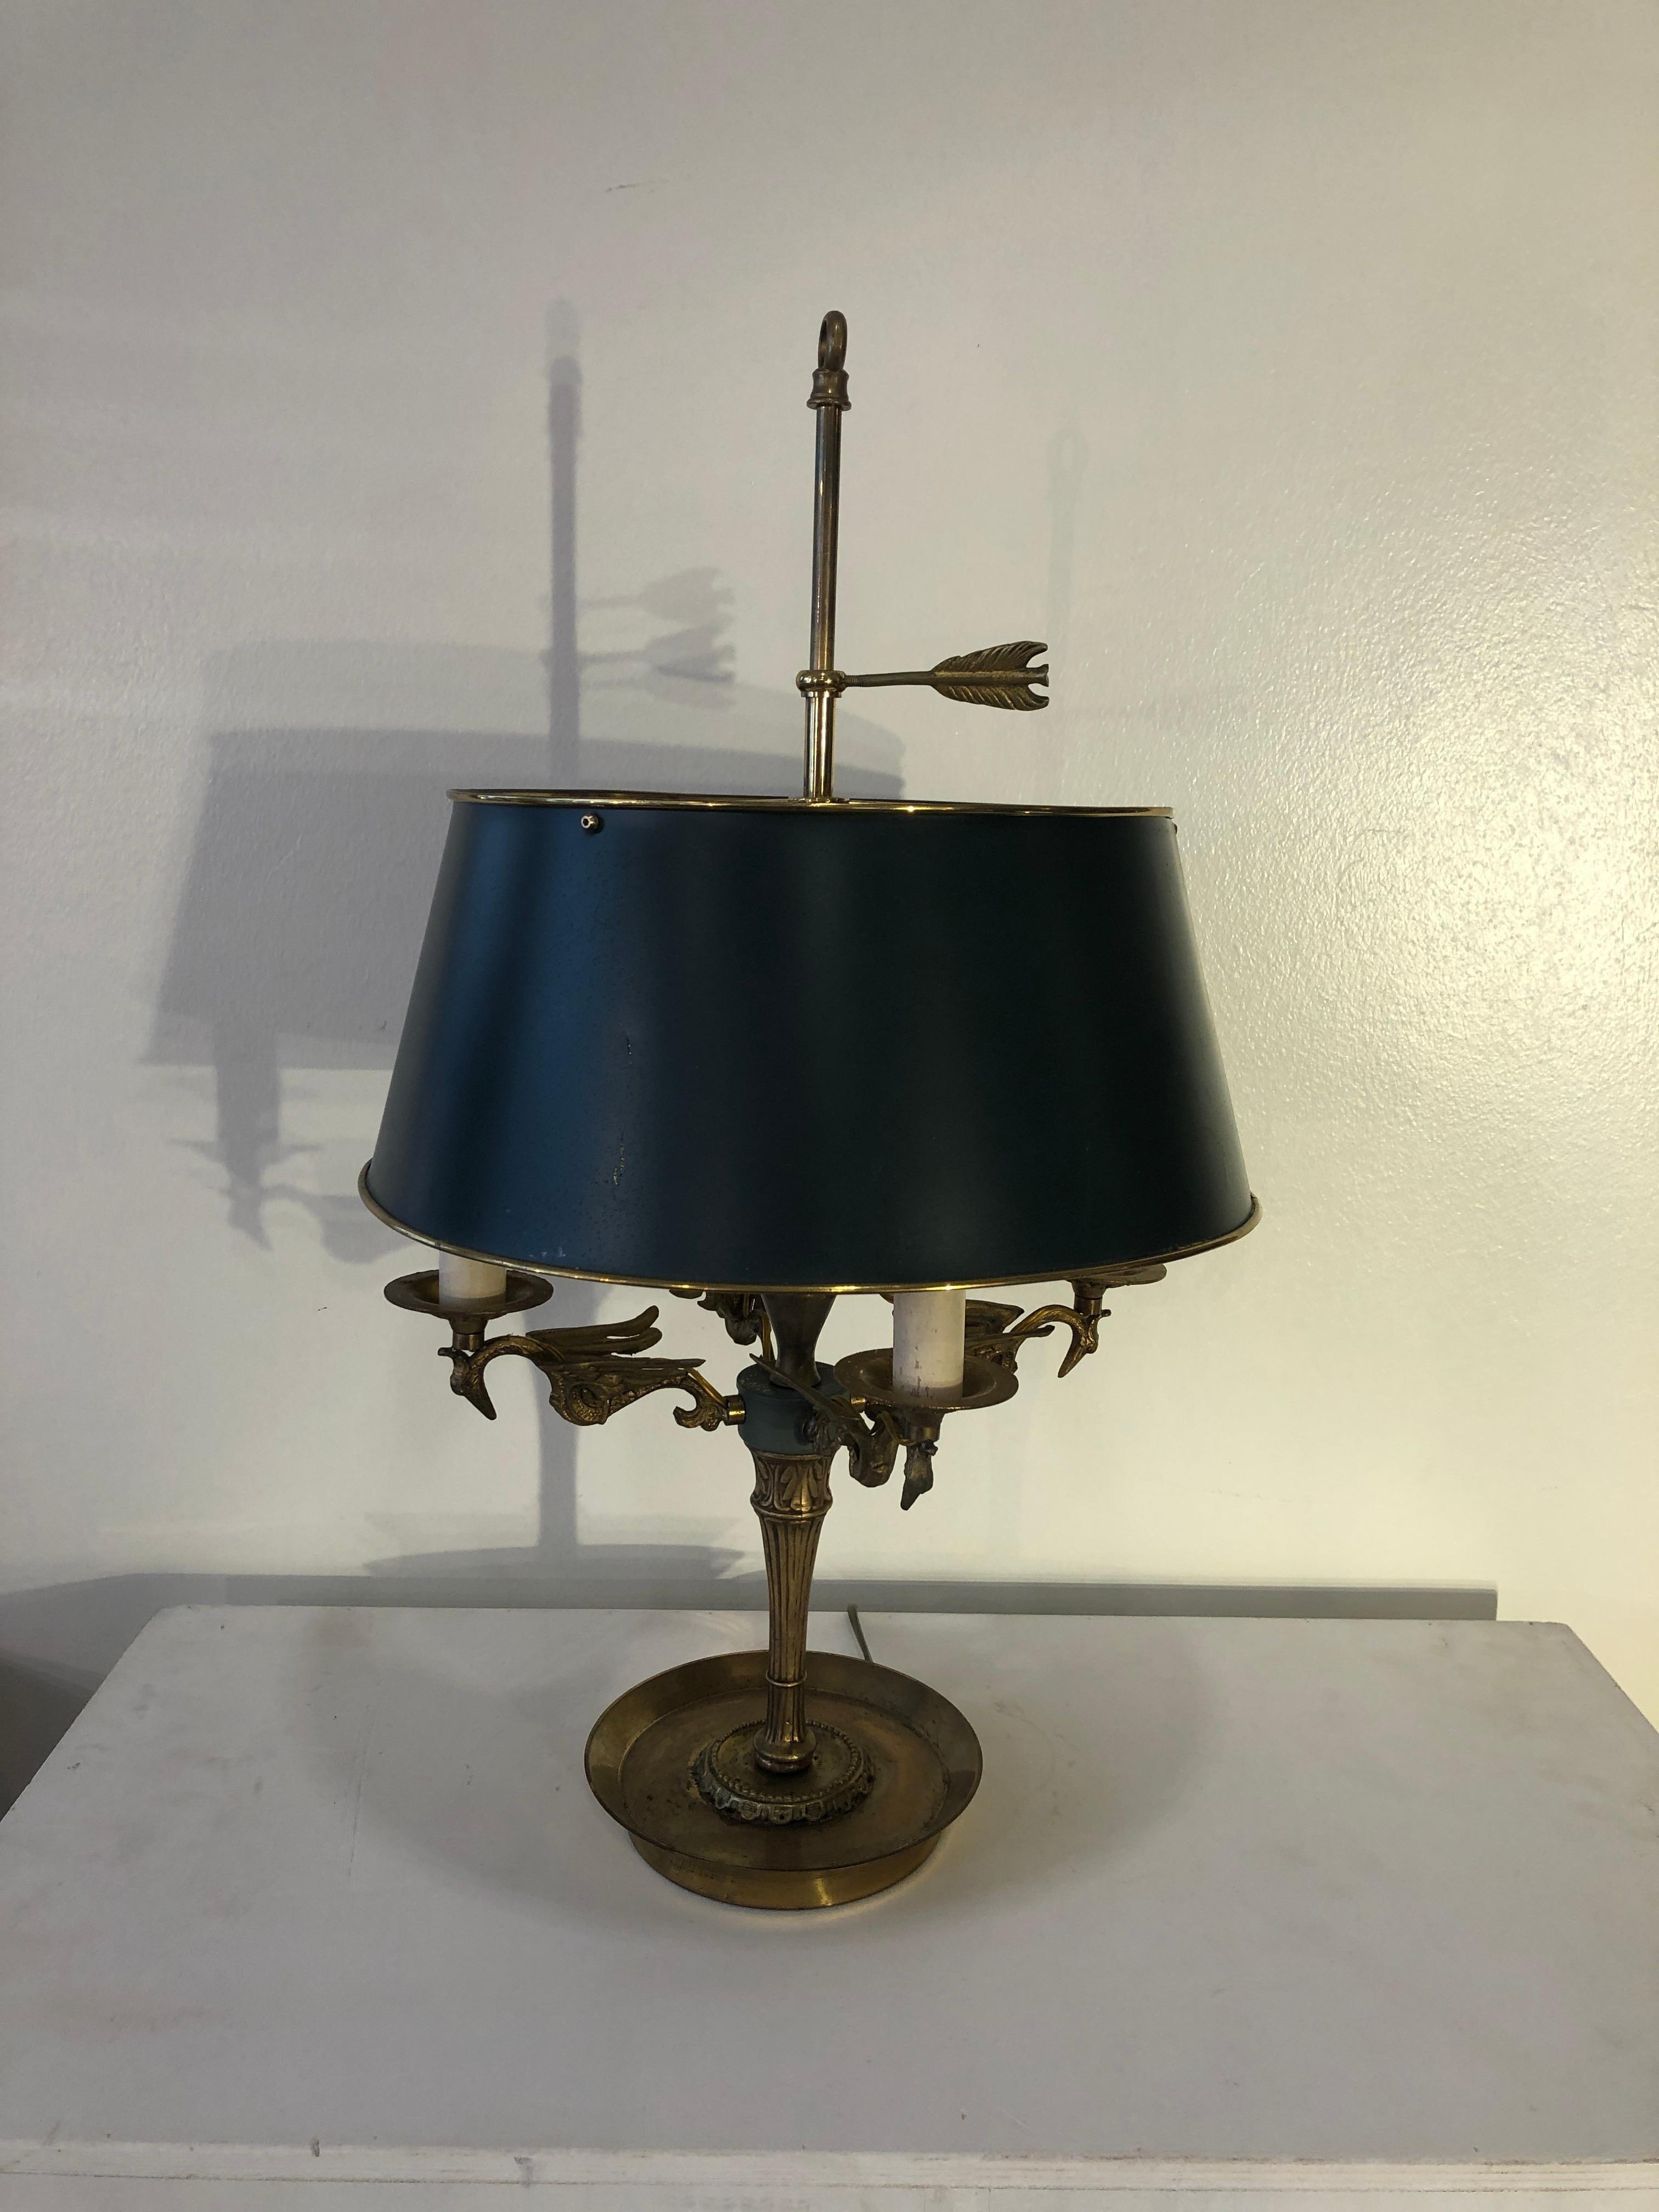 Mid century golden bronze and metal dark green rounded lamp-shade Bouillotte lamp. From France from 1940s period on the style of antique Empire lamps. Rounded - brass - base, four swans shaped lights holder, adjustable in height, dark green